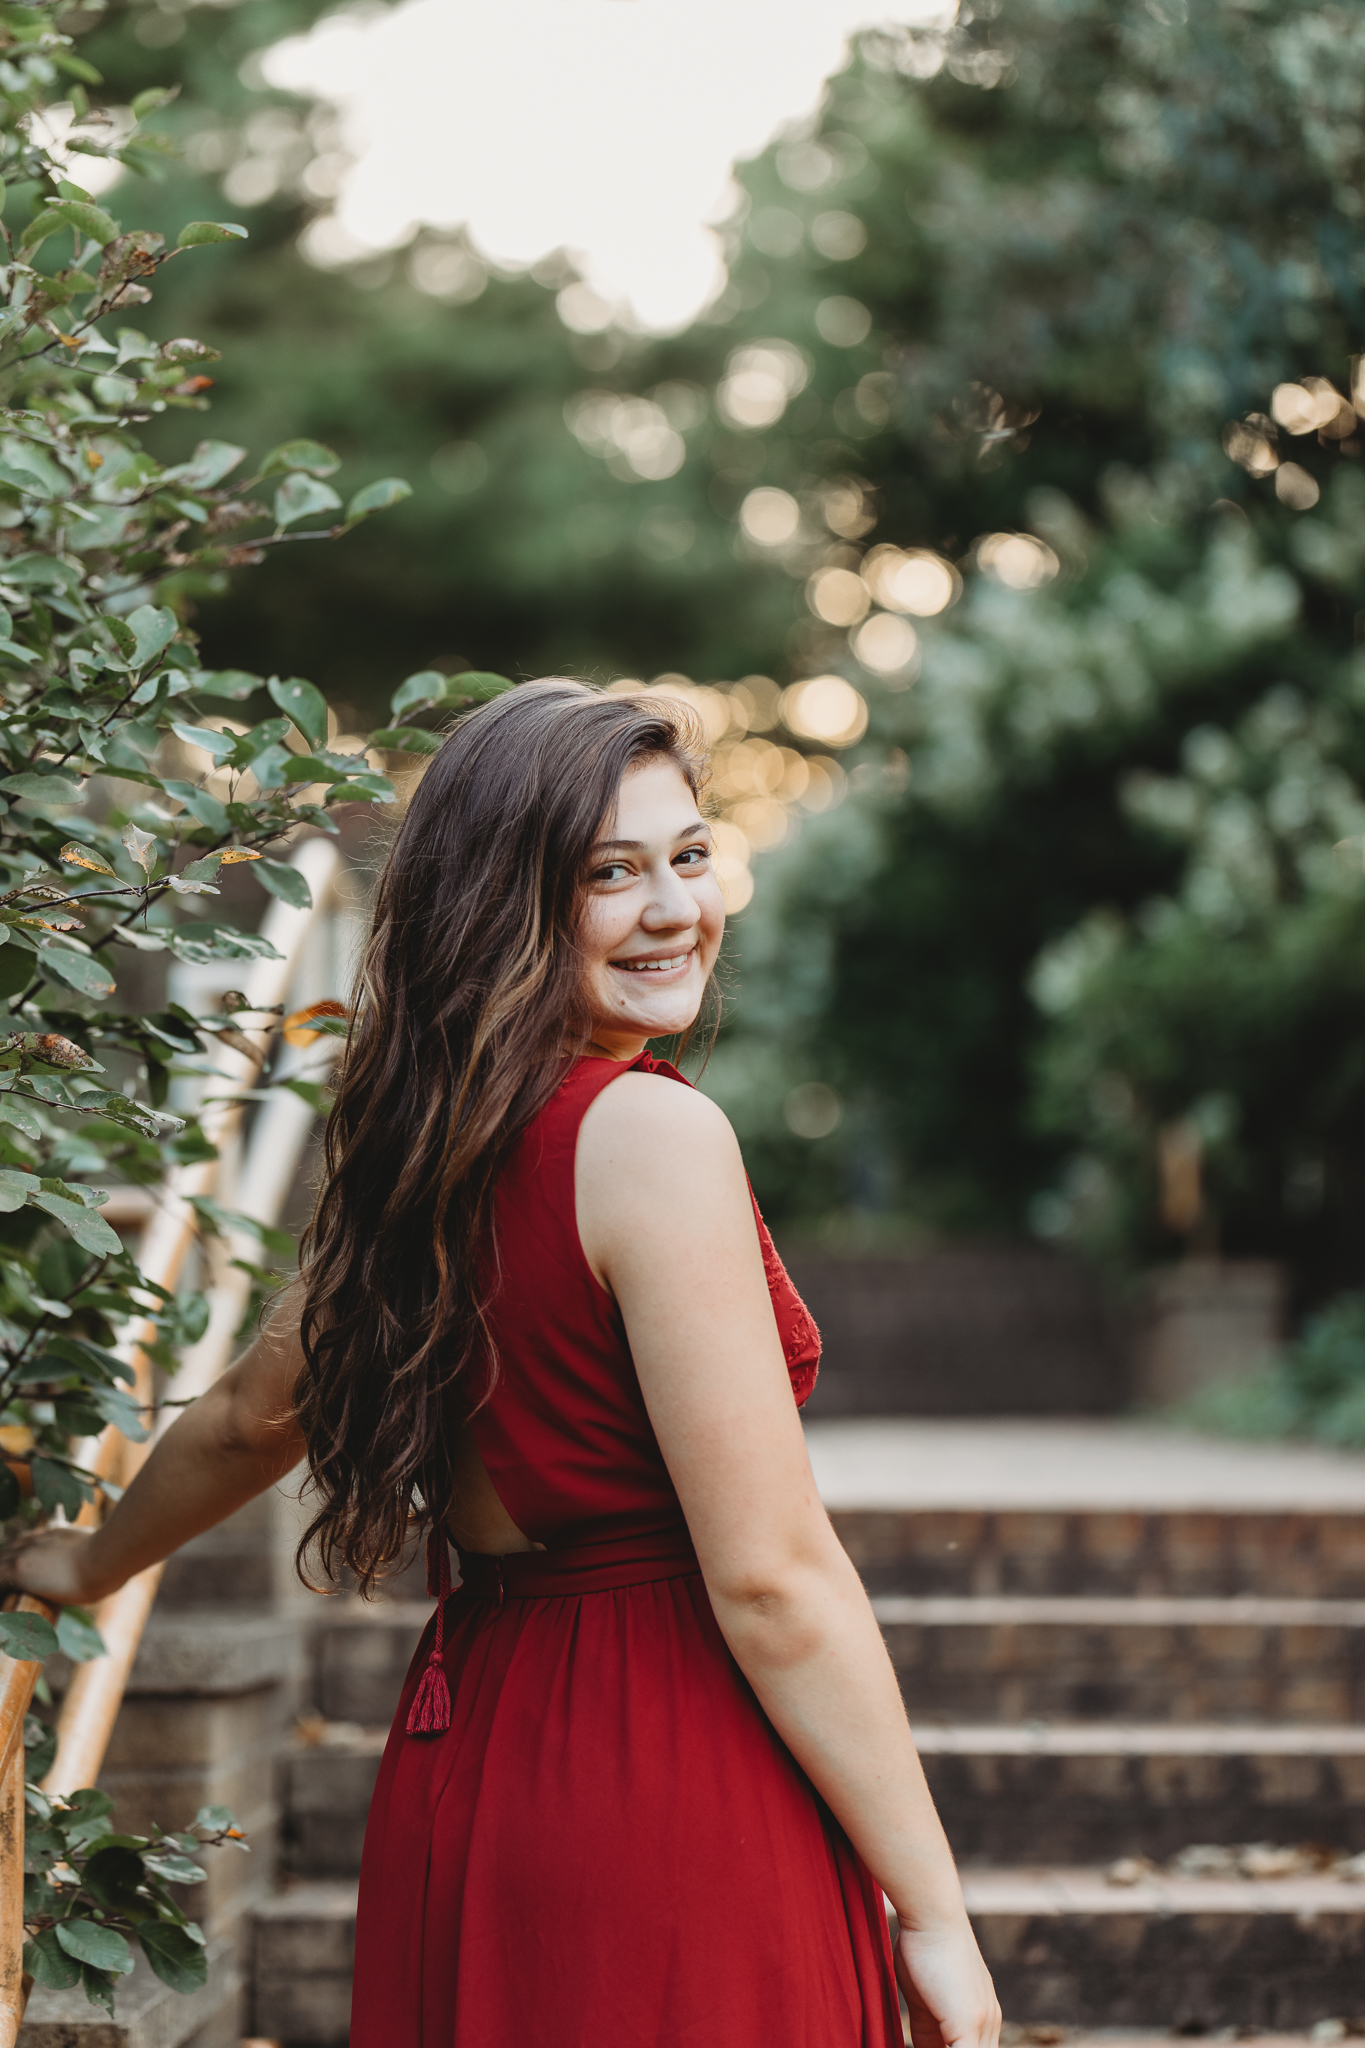 A high school senior in a long red dress walking up a stairway | AMG Photography